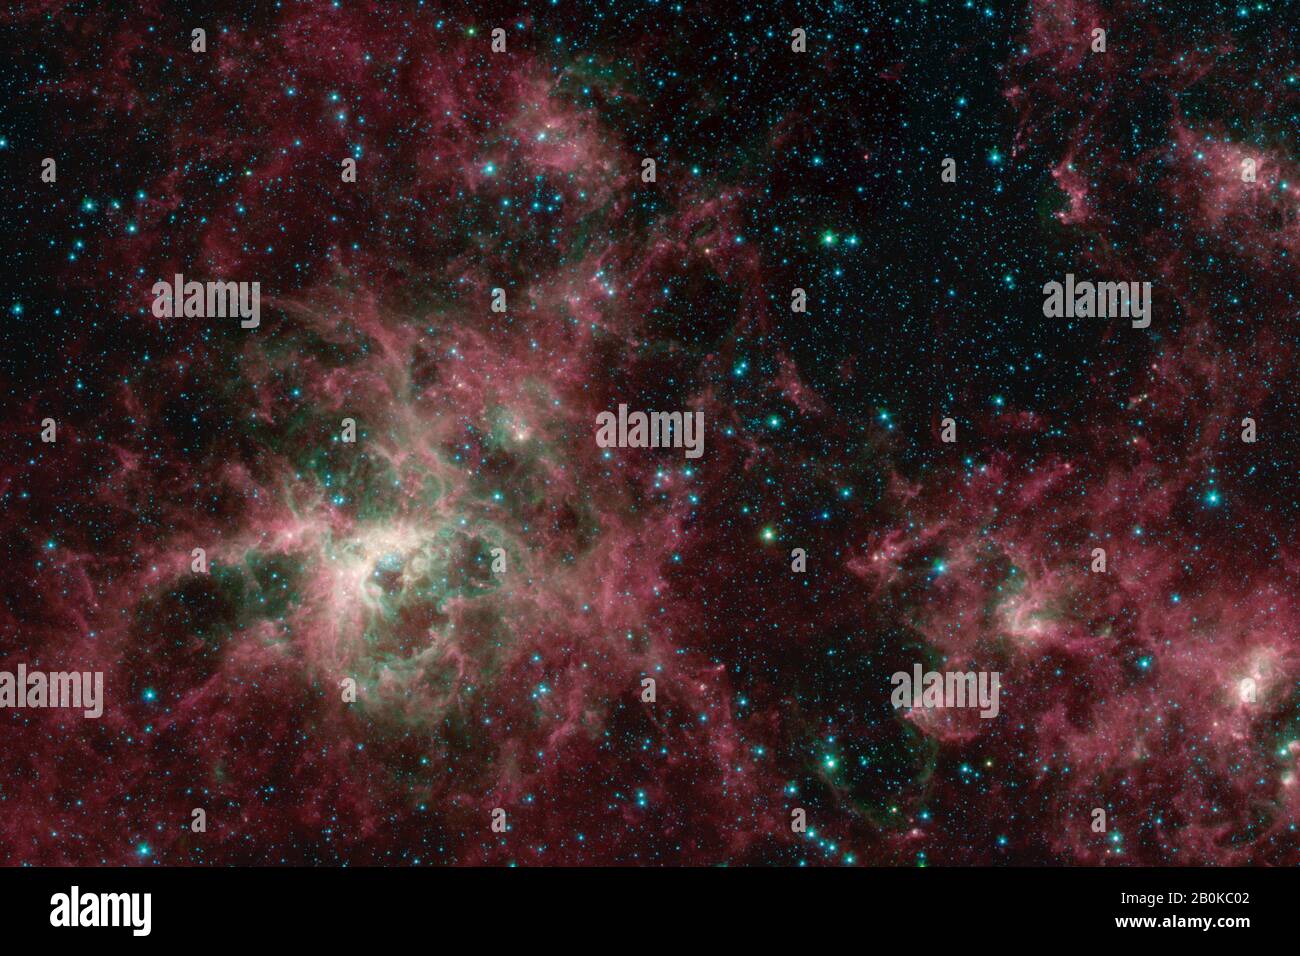 Washington, United States. 20th Feb, 2020. This image from NASA's Spitzer Space Telescope shows the Tarantula Nebula in three wavelengths of infrared light, each represented by a different color. The Tarantula Nebula was one of the first targets studied by the infrared observatory after its launch in 2003, and the telescope has revisited it many times since. Now that Spitzer was retired on January 30, 2020, scientists have generated a new view of the nebula from Spitzer data. NASA/UPI Credit: UPI/Alamy Live News Stock Photo